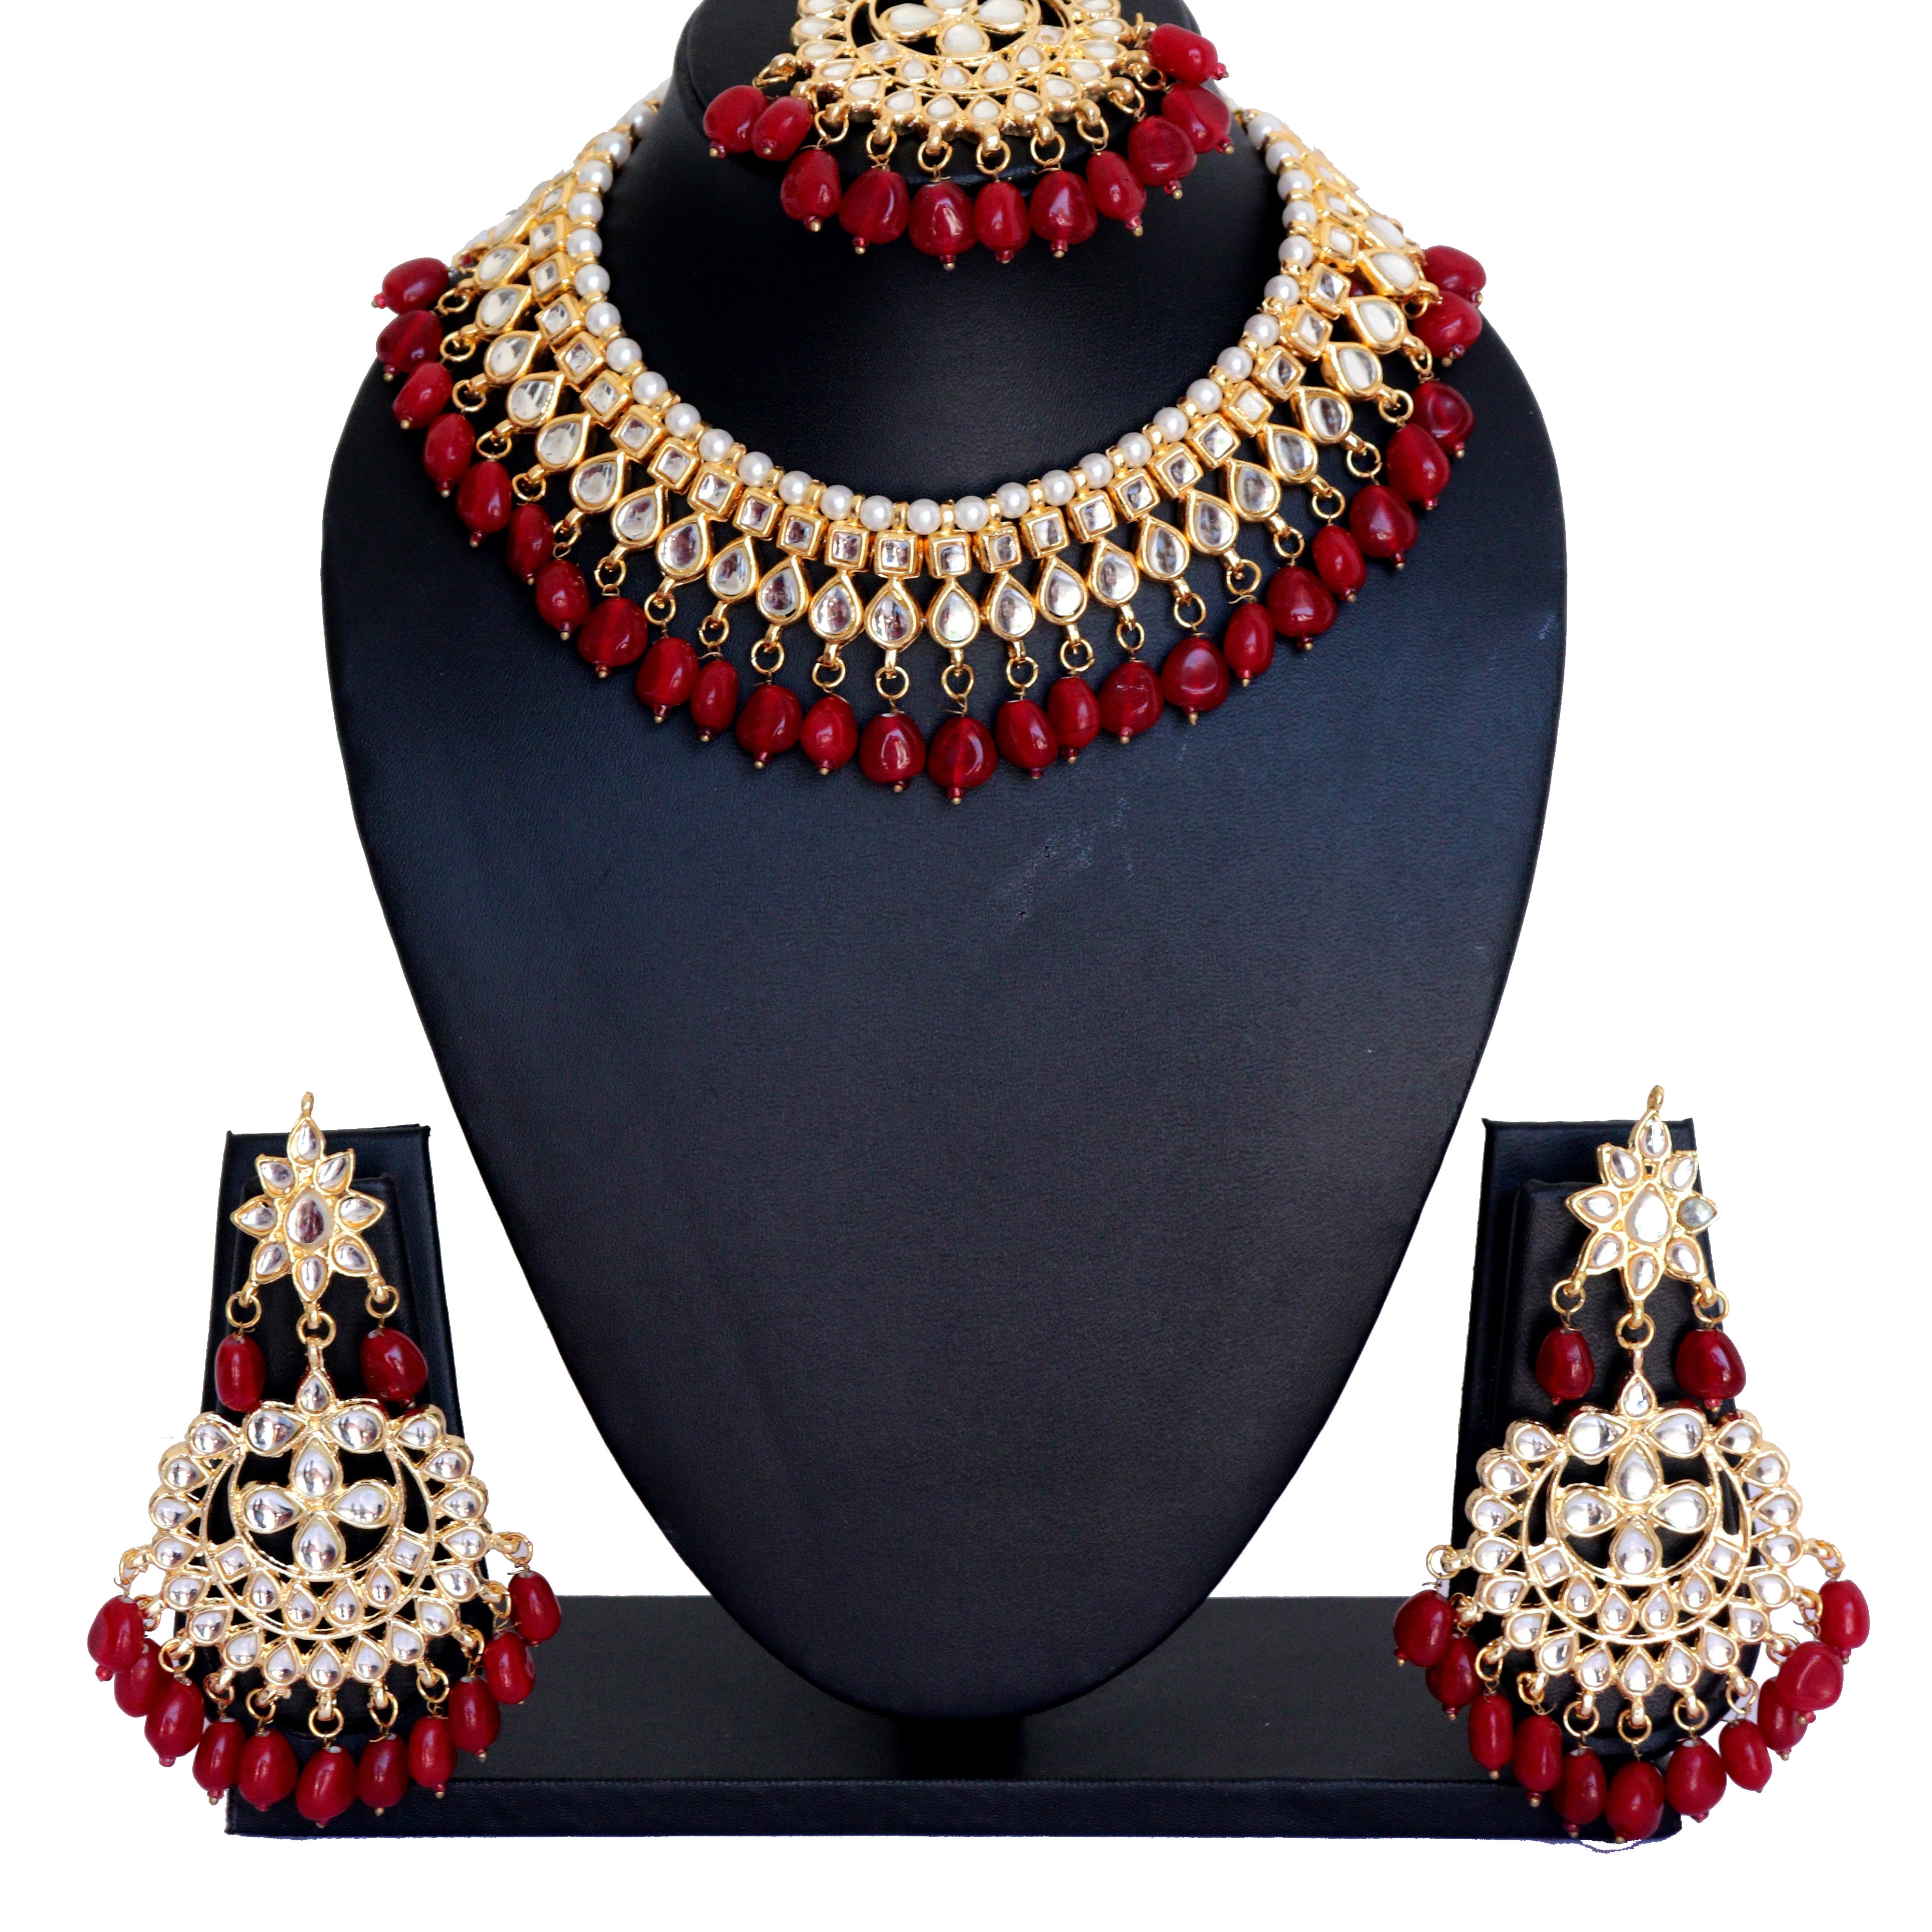 Kundan Choker Necklace Set with Red Pearls